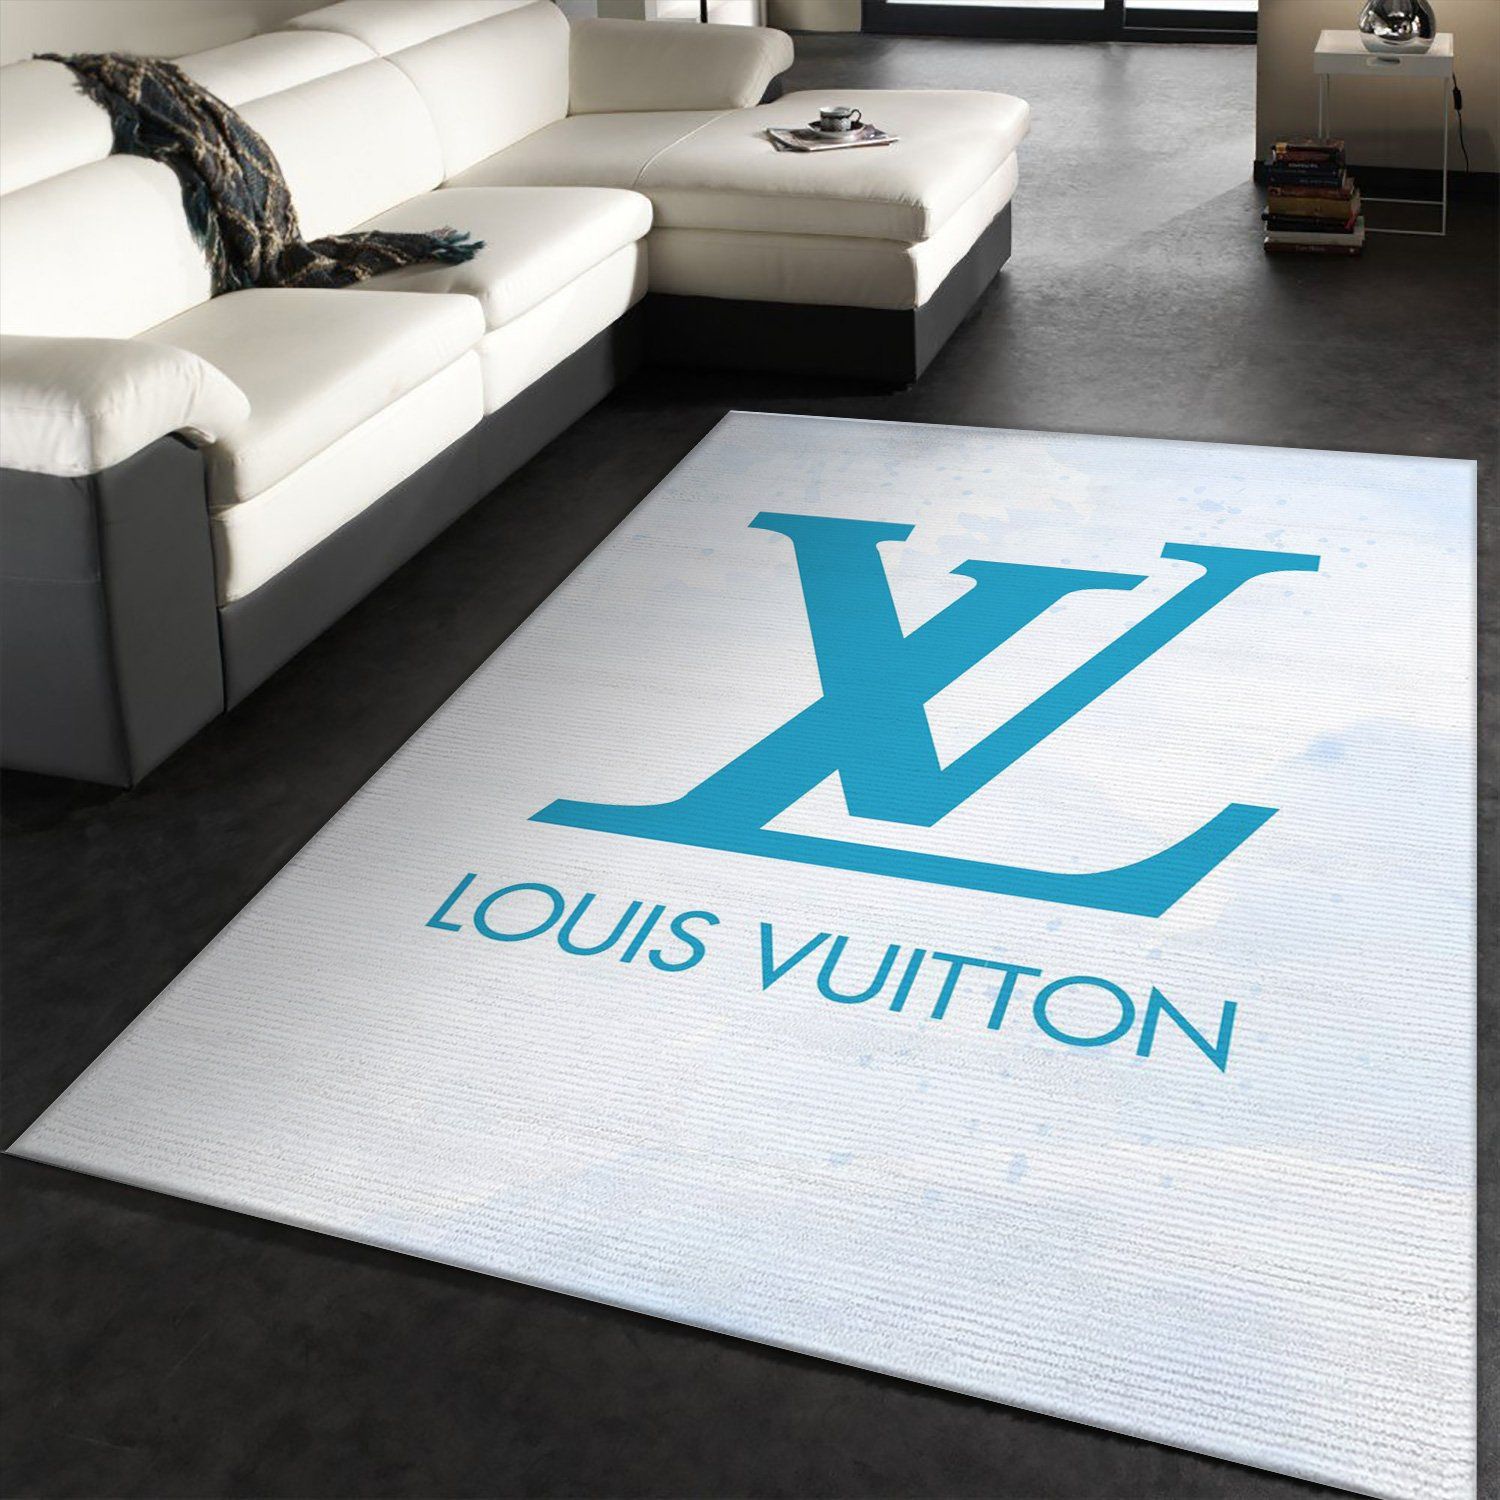 Louis vuitton area rugs living room carpet fn091102 christmas gift